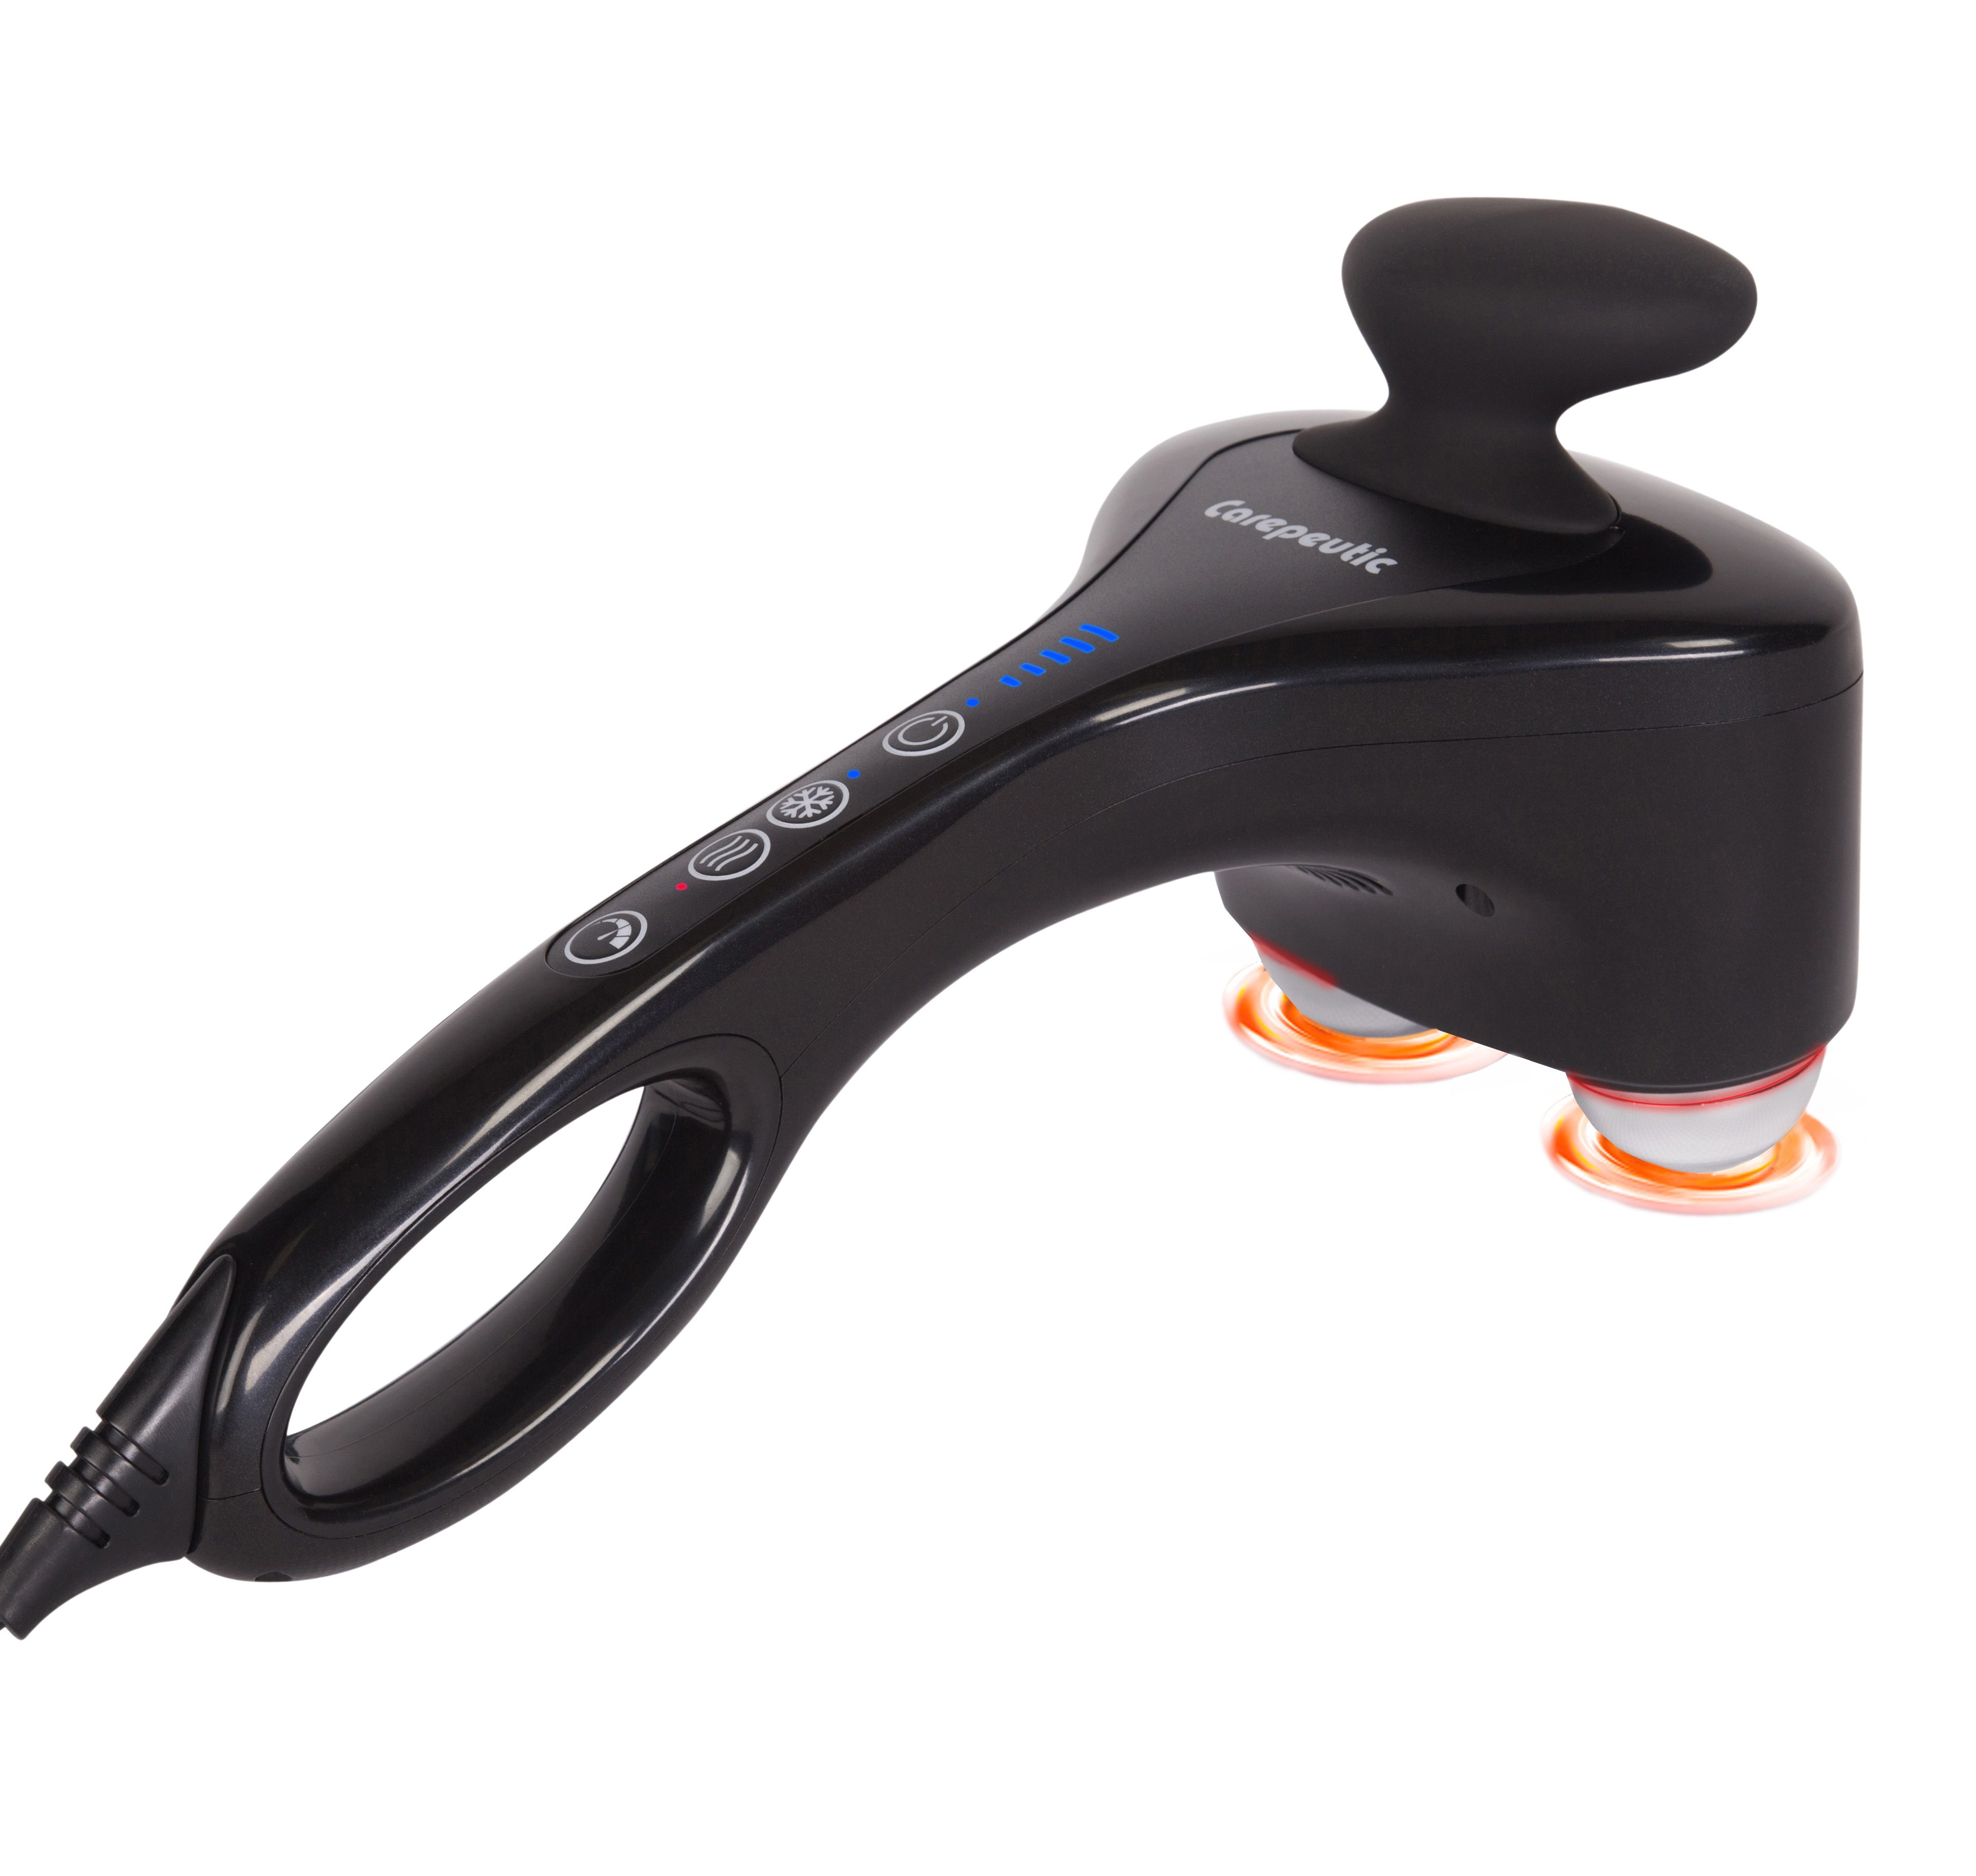 Picture of Carepeutic KH394 Bionic-Point Heat & Cold Professional Handheld Massager